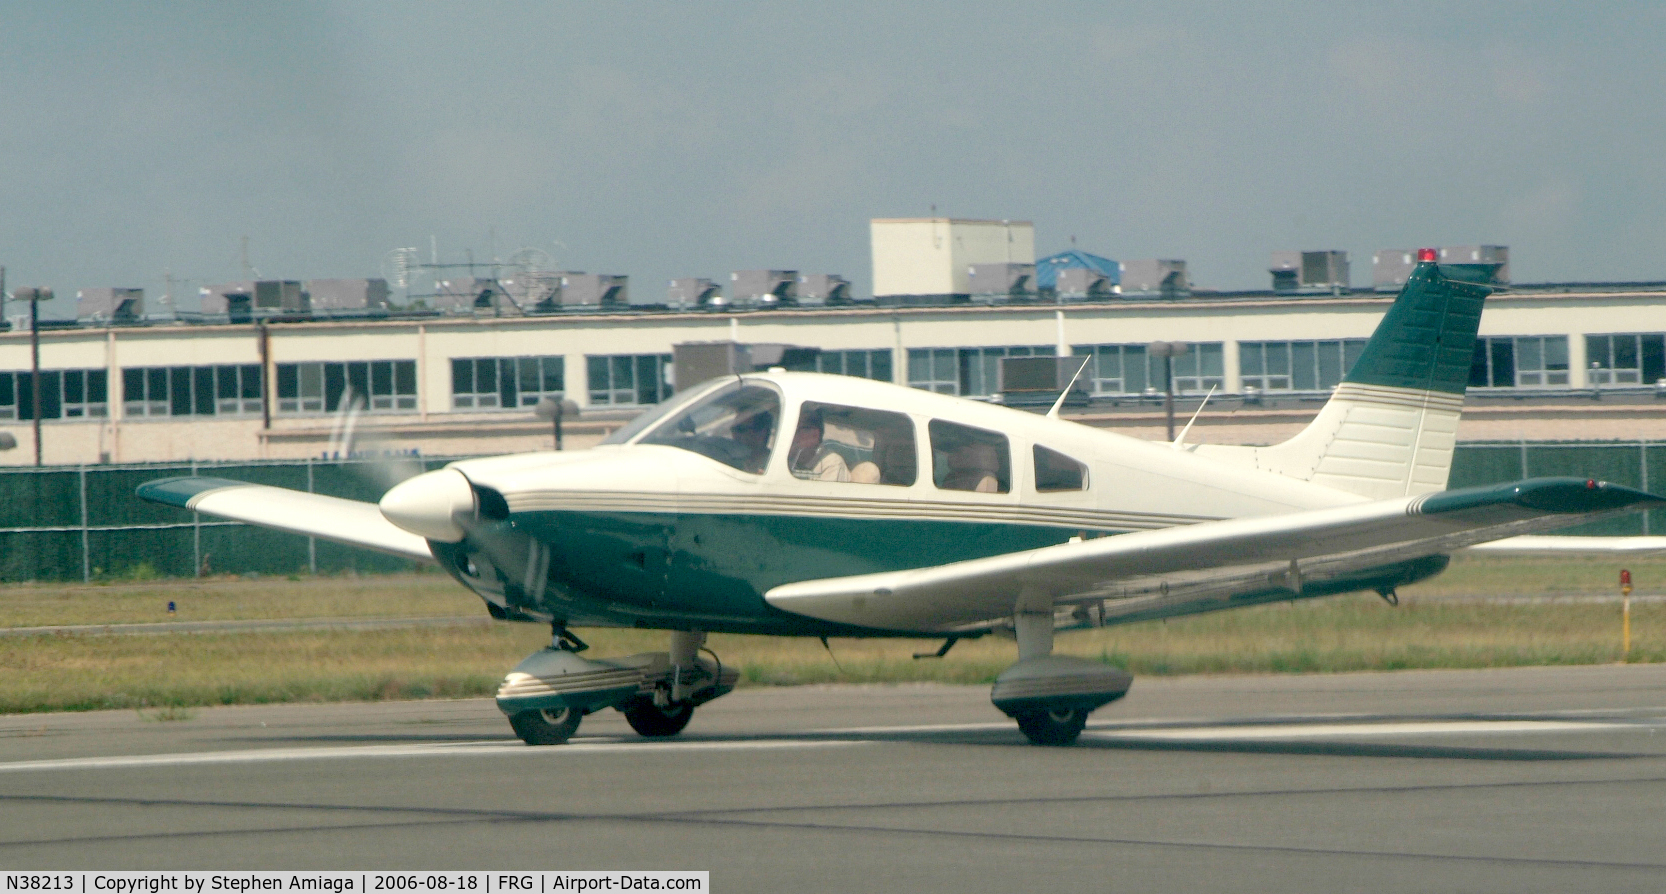 N38213, 1977 Piper PA-28-181 C/N 28-7790529, Archer 213 position and hold, RWY 19.